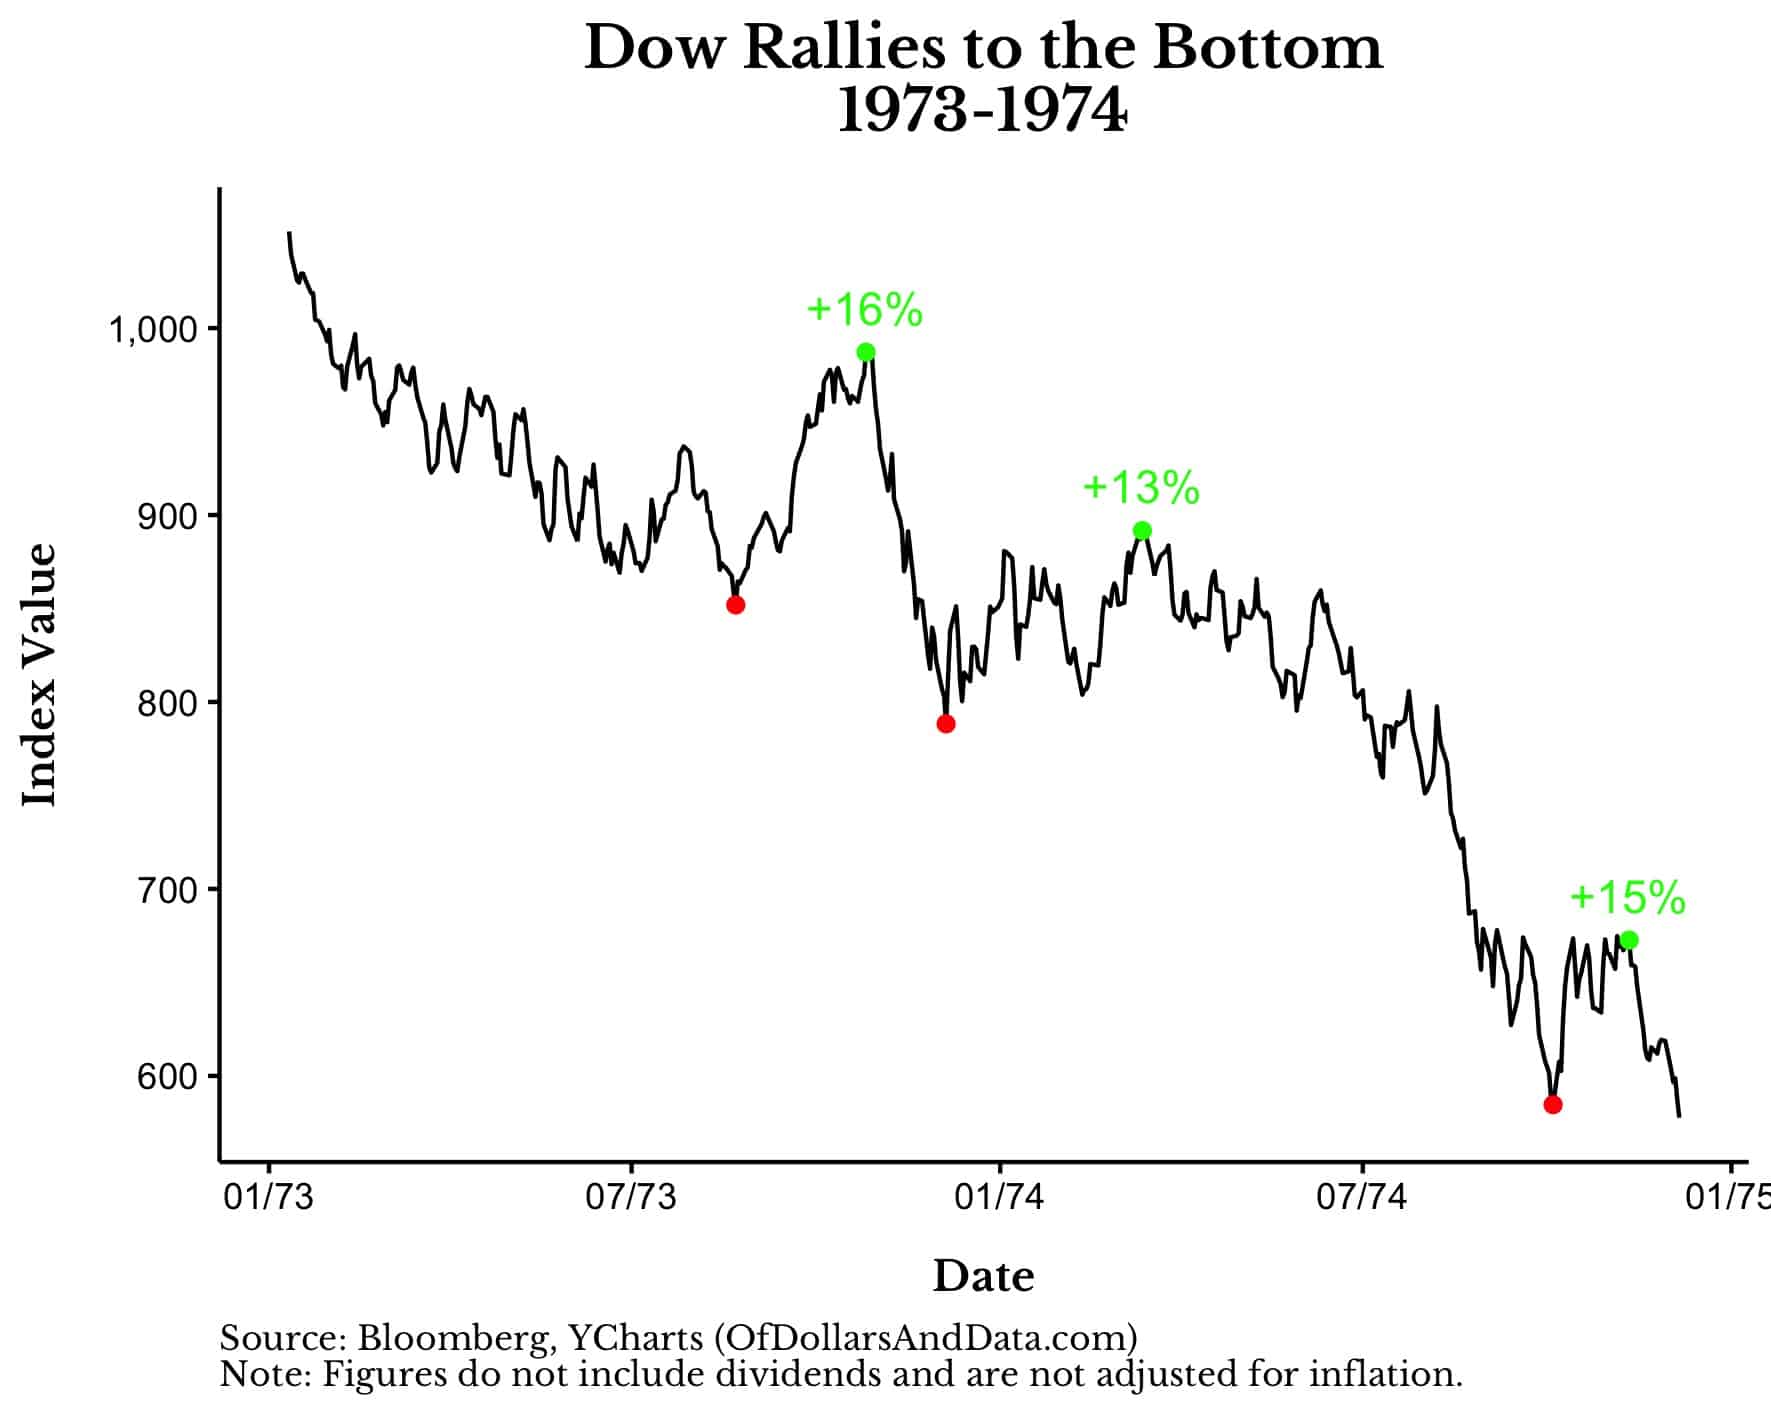 Dow Jones Industrial Average rallies to the bottom from 1973-1974.